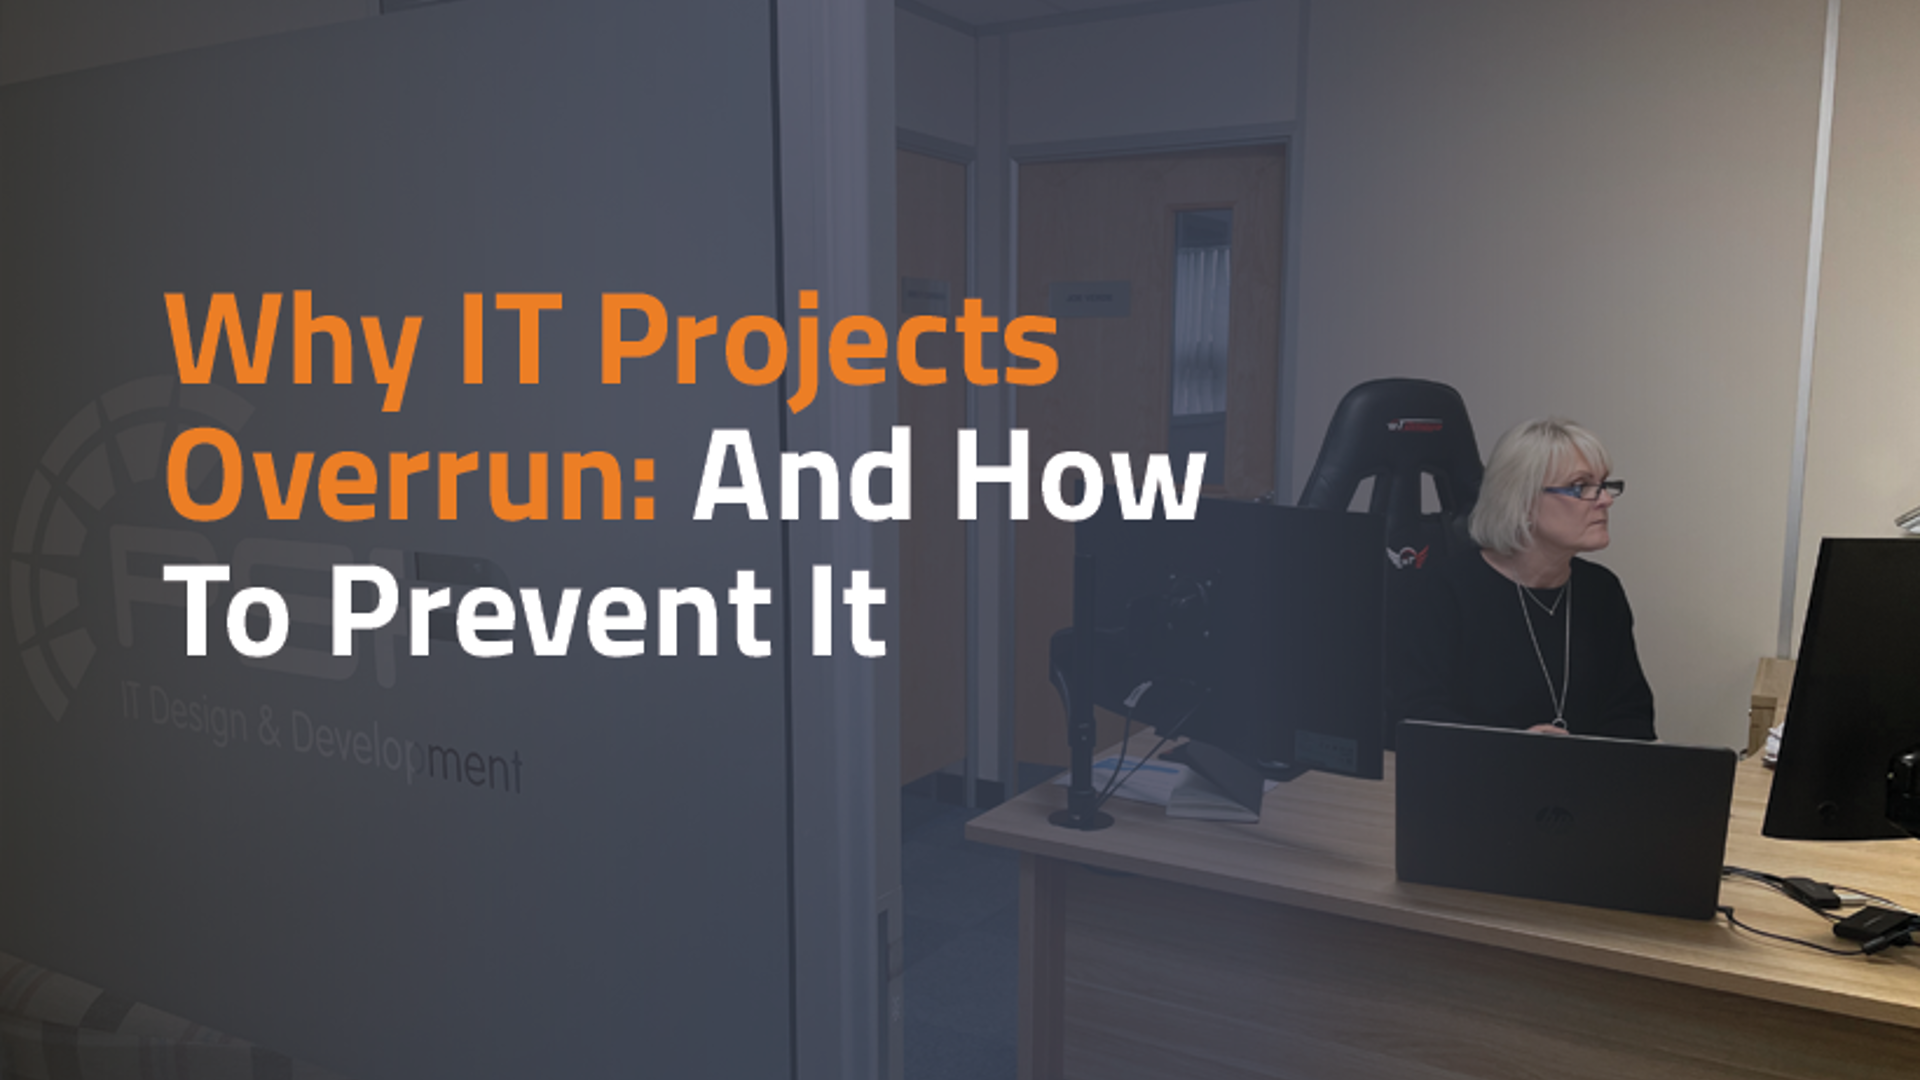 How to stop IT projects going over budget.